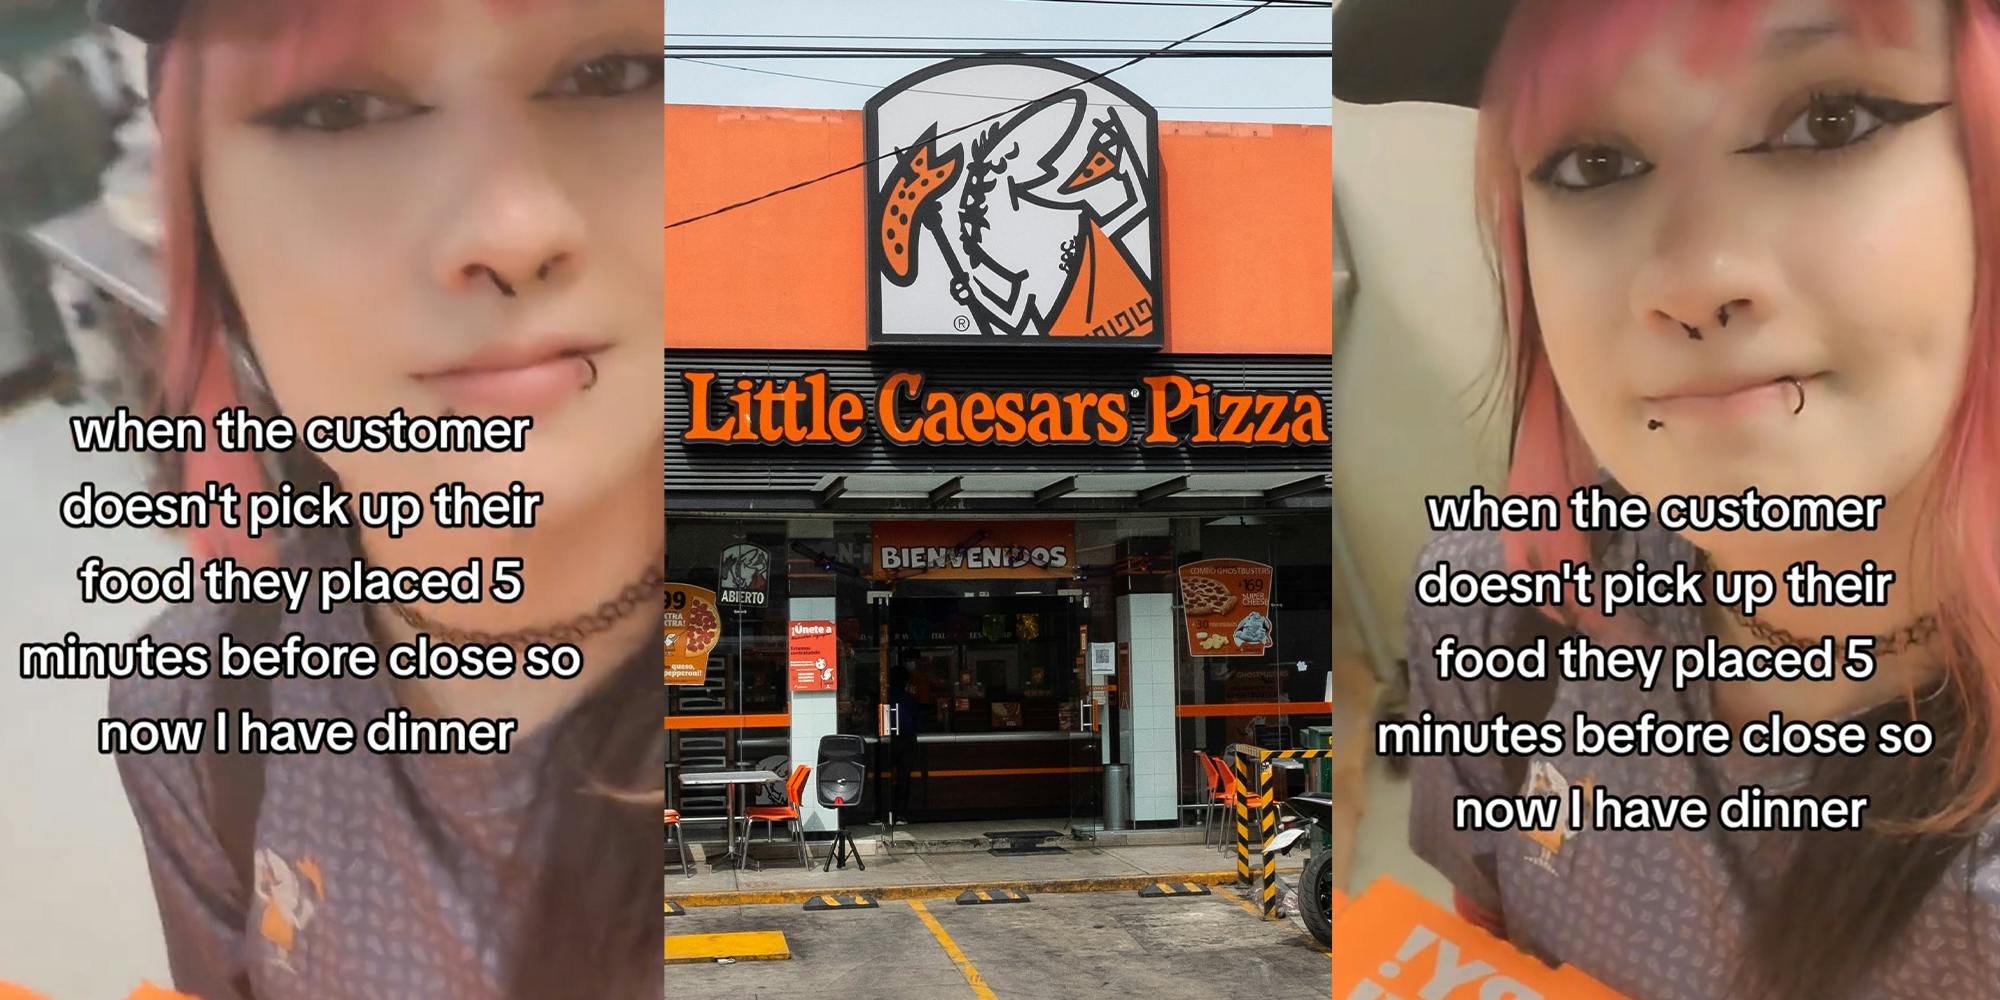 'Now I have dinner': Little Caesars worker exposes free pizza 'hack' for employees. But does it work?